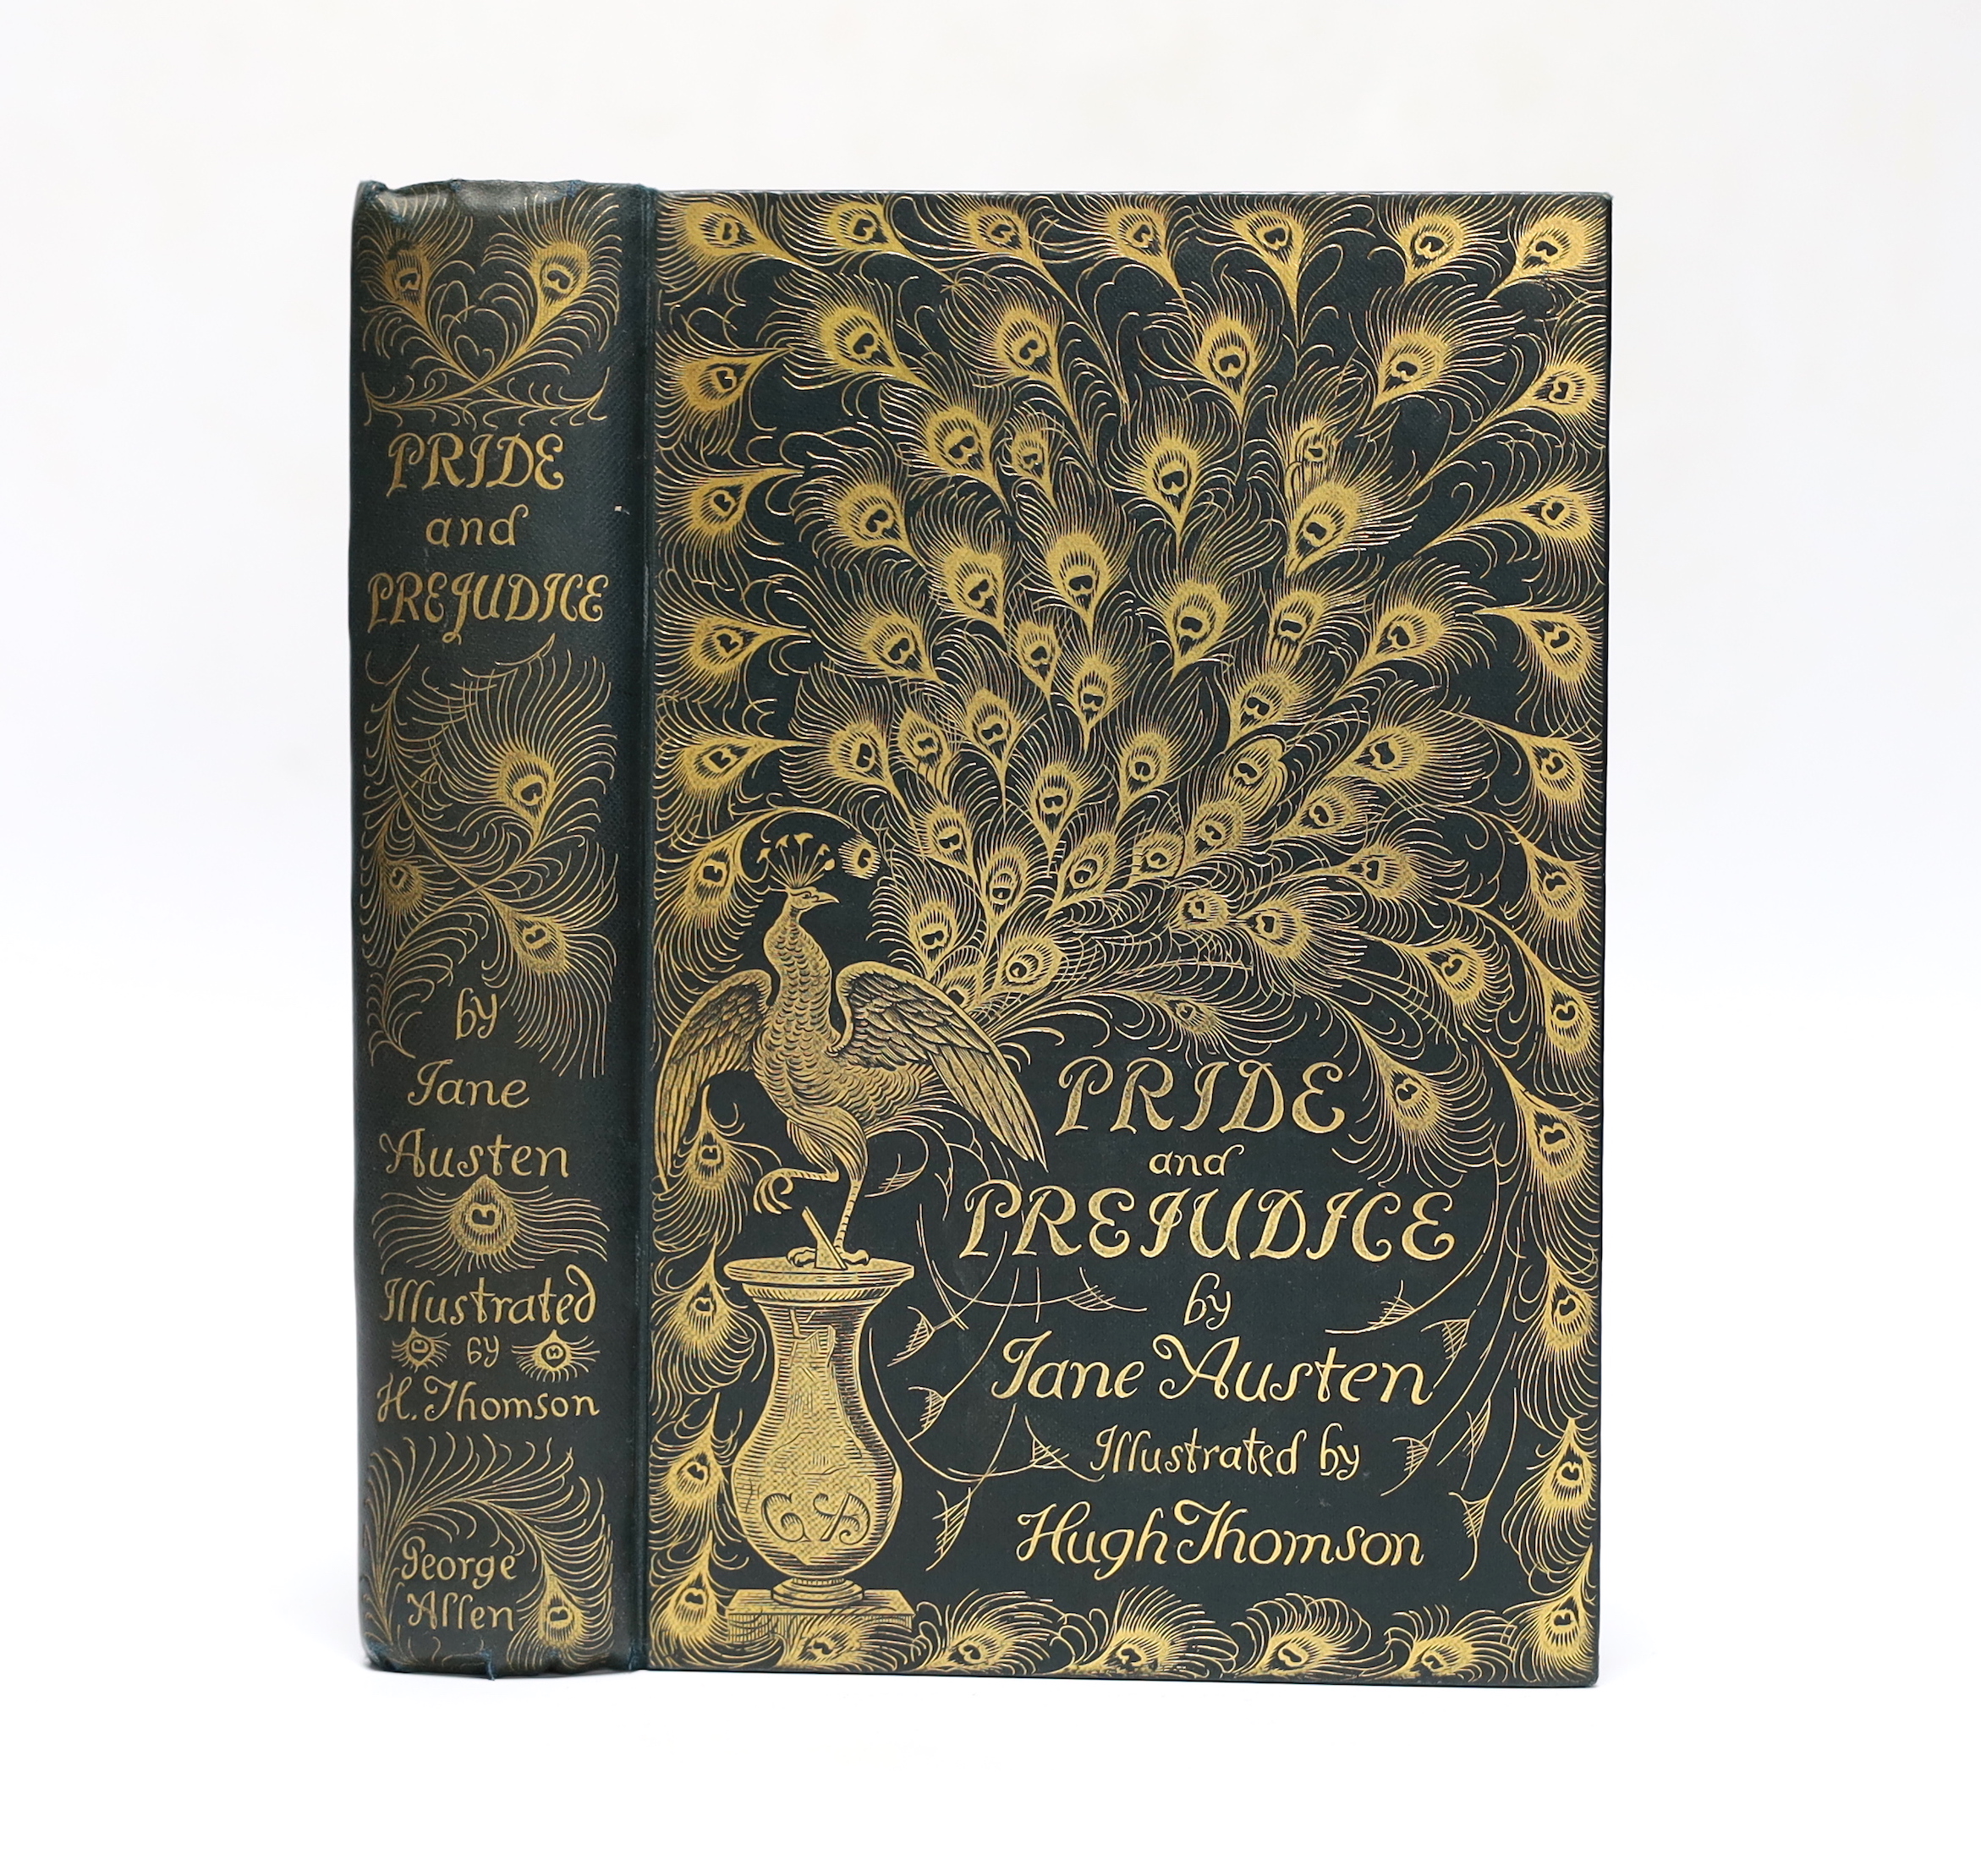 Austen, Jane - Pride and Prejudice, 1st peacock edition, with a preface by George Saintsbury, illustrated with 160 line drawings by Hugh Thomson, 8vo, original dark blue/green cloth gilt, half title with neat ink ownersh